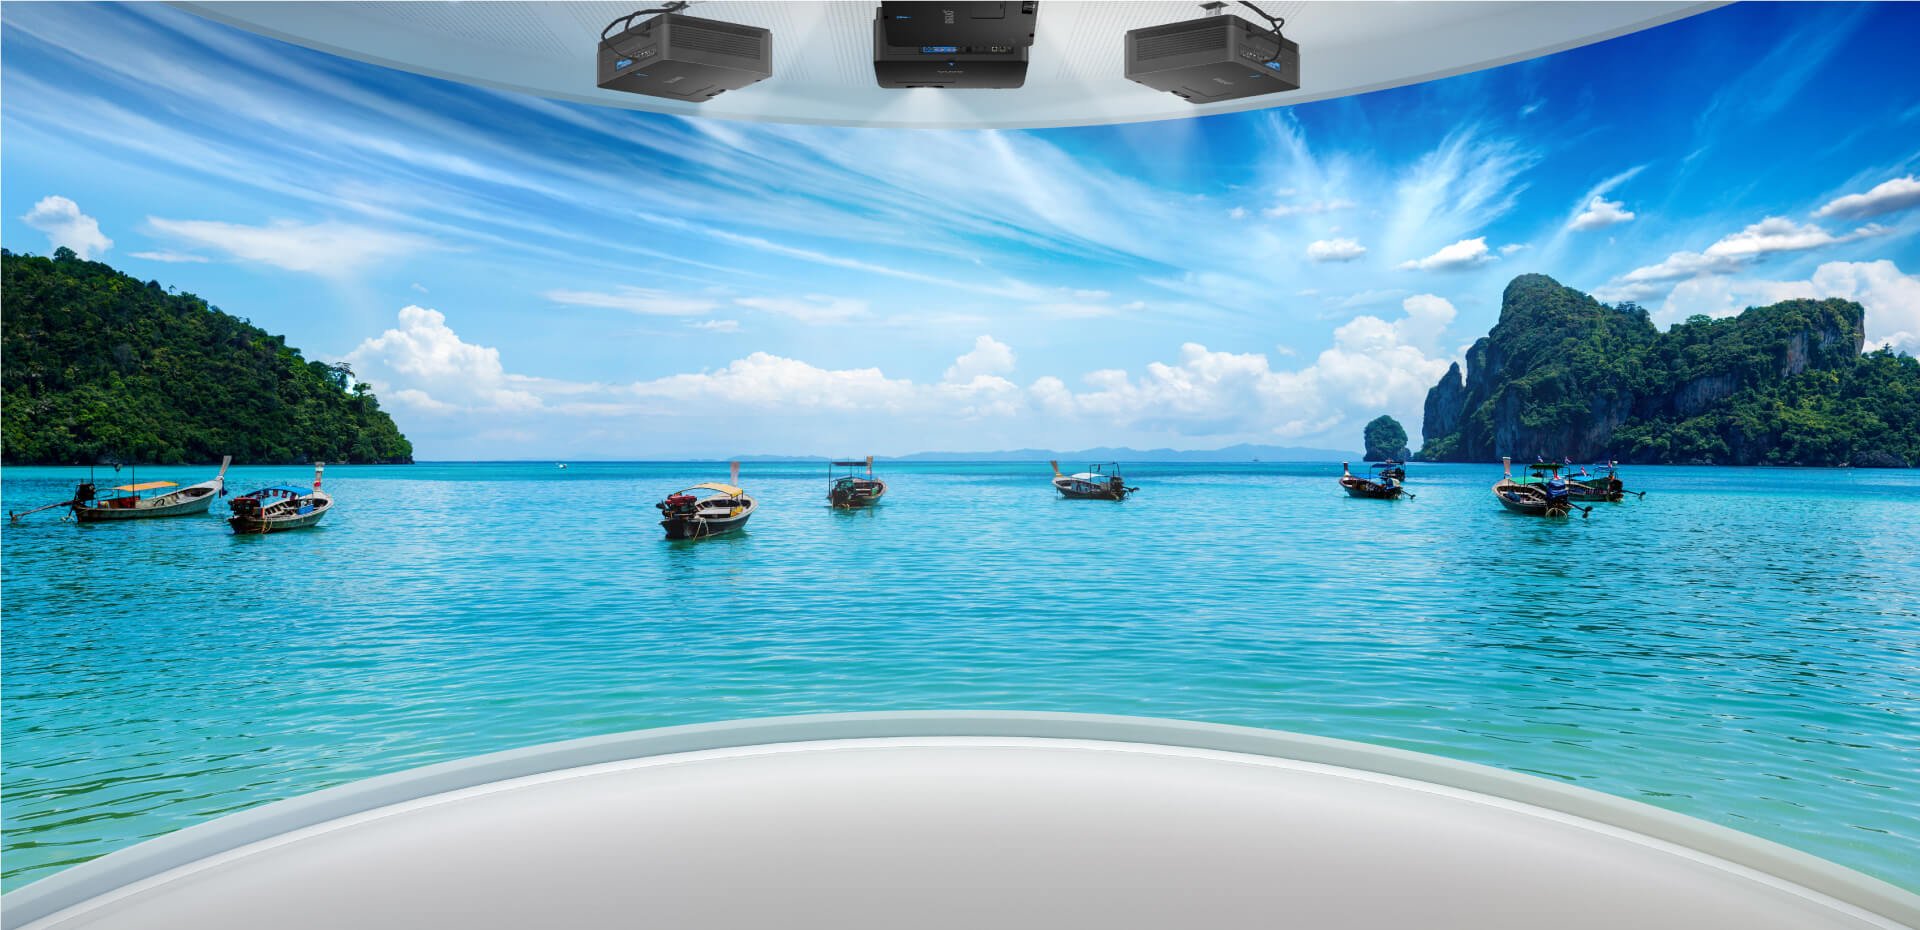 BenQ LU960 Installation Projector with White Balance Calibration for Seamless Edge Blending in a panoramic view for flight simulation